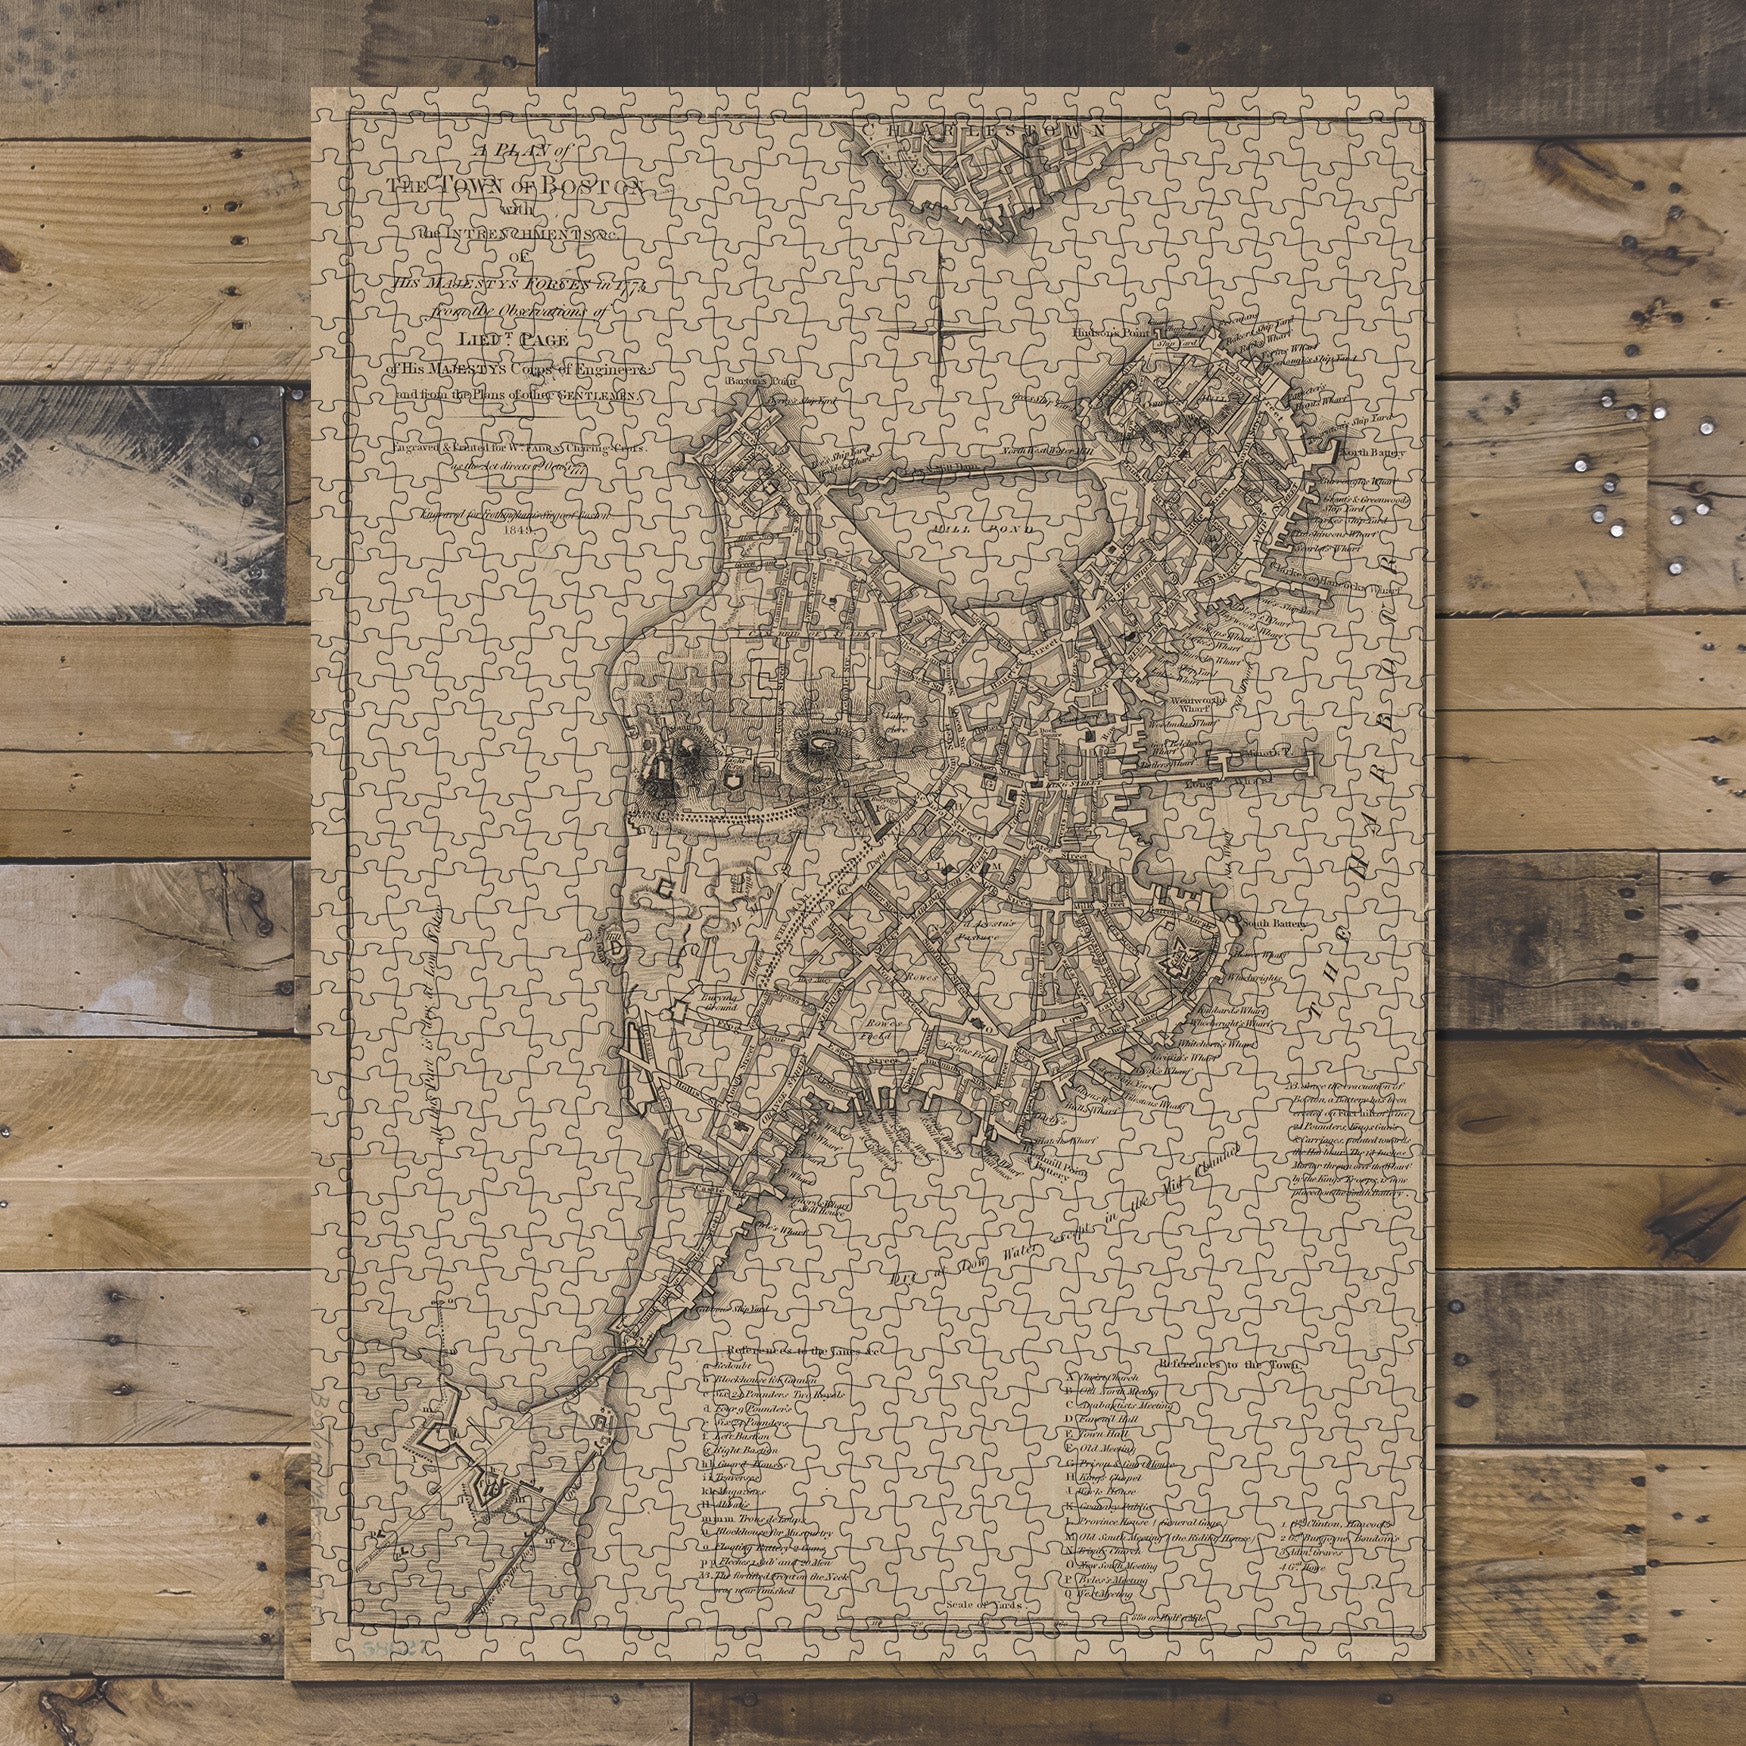 1000 Piece Jigsaw Puzzle 1849 Map of Boston A plan of the town of Boston Page, Thomas H